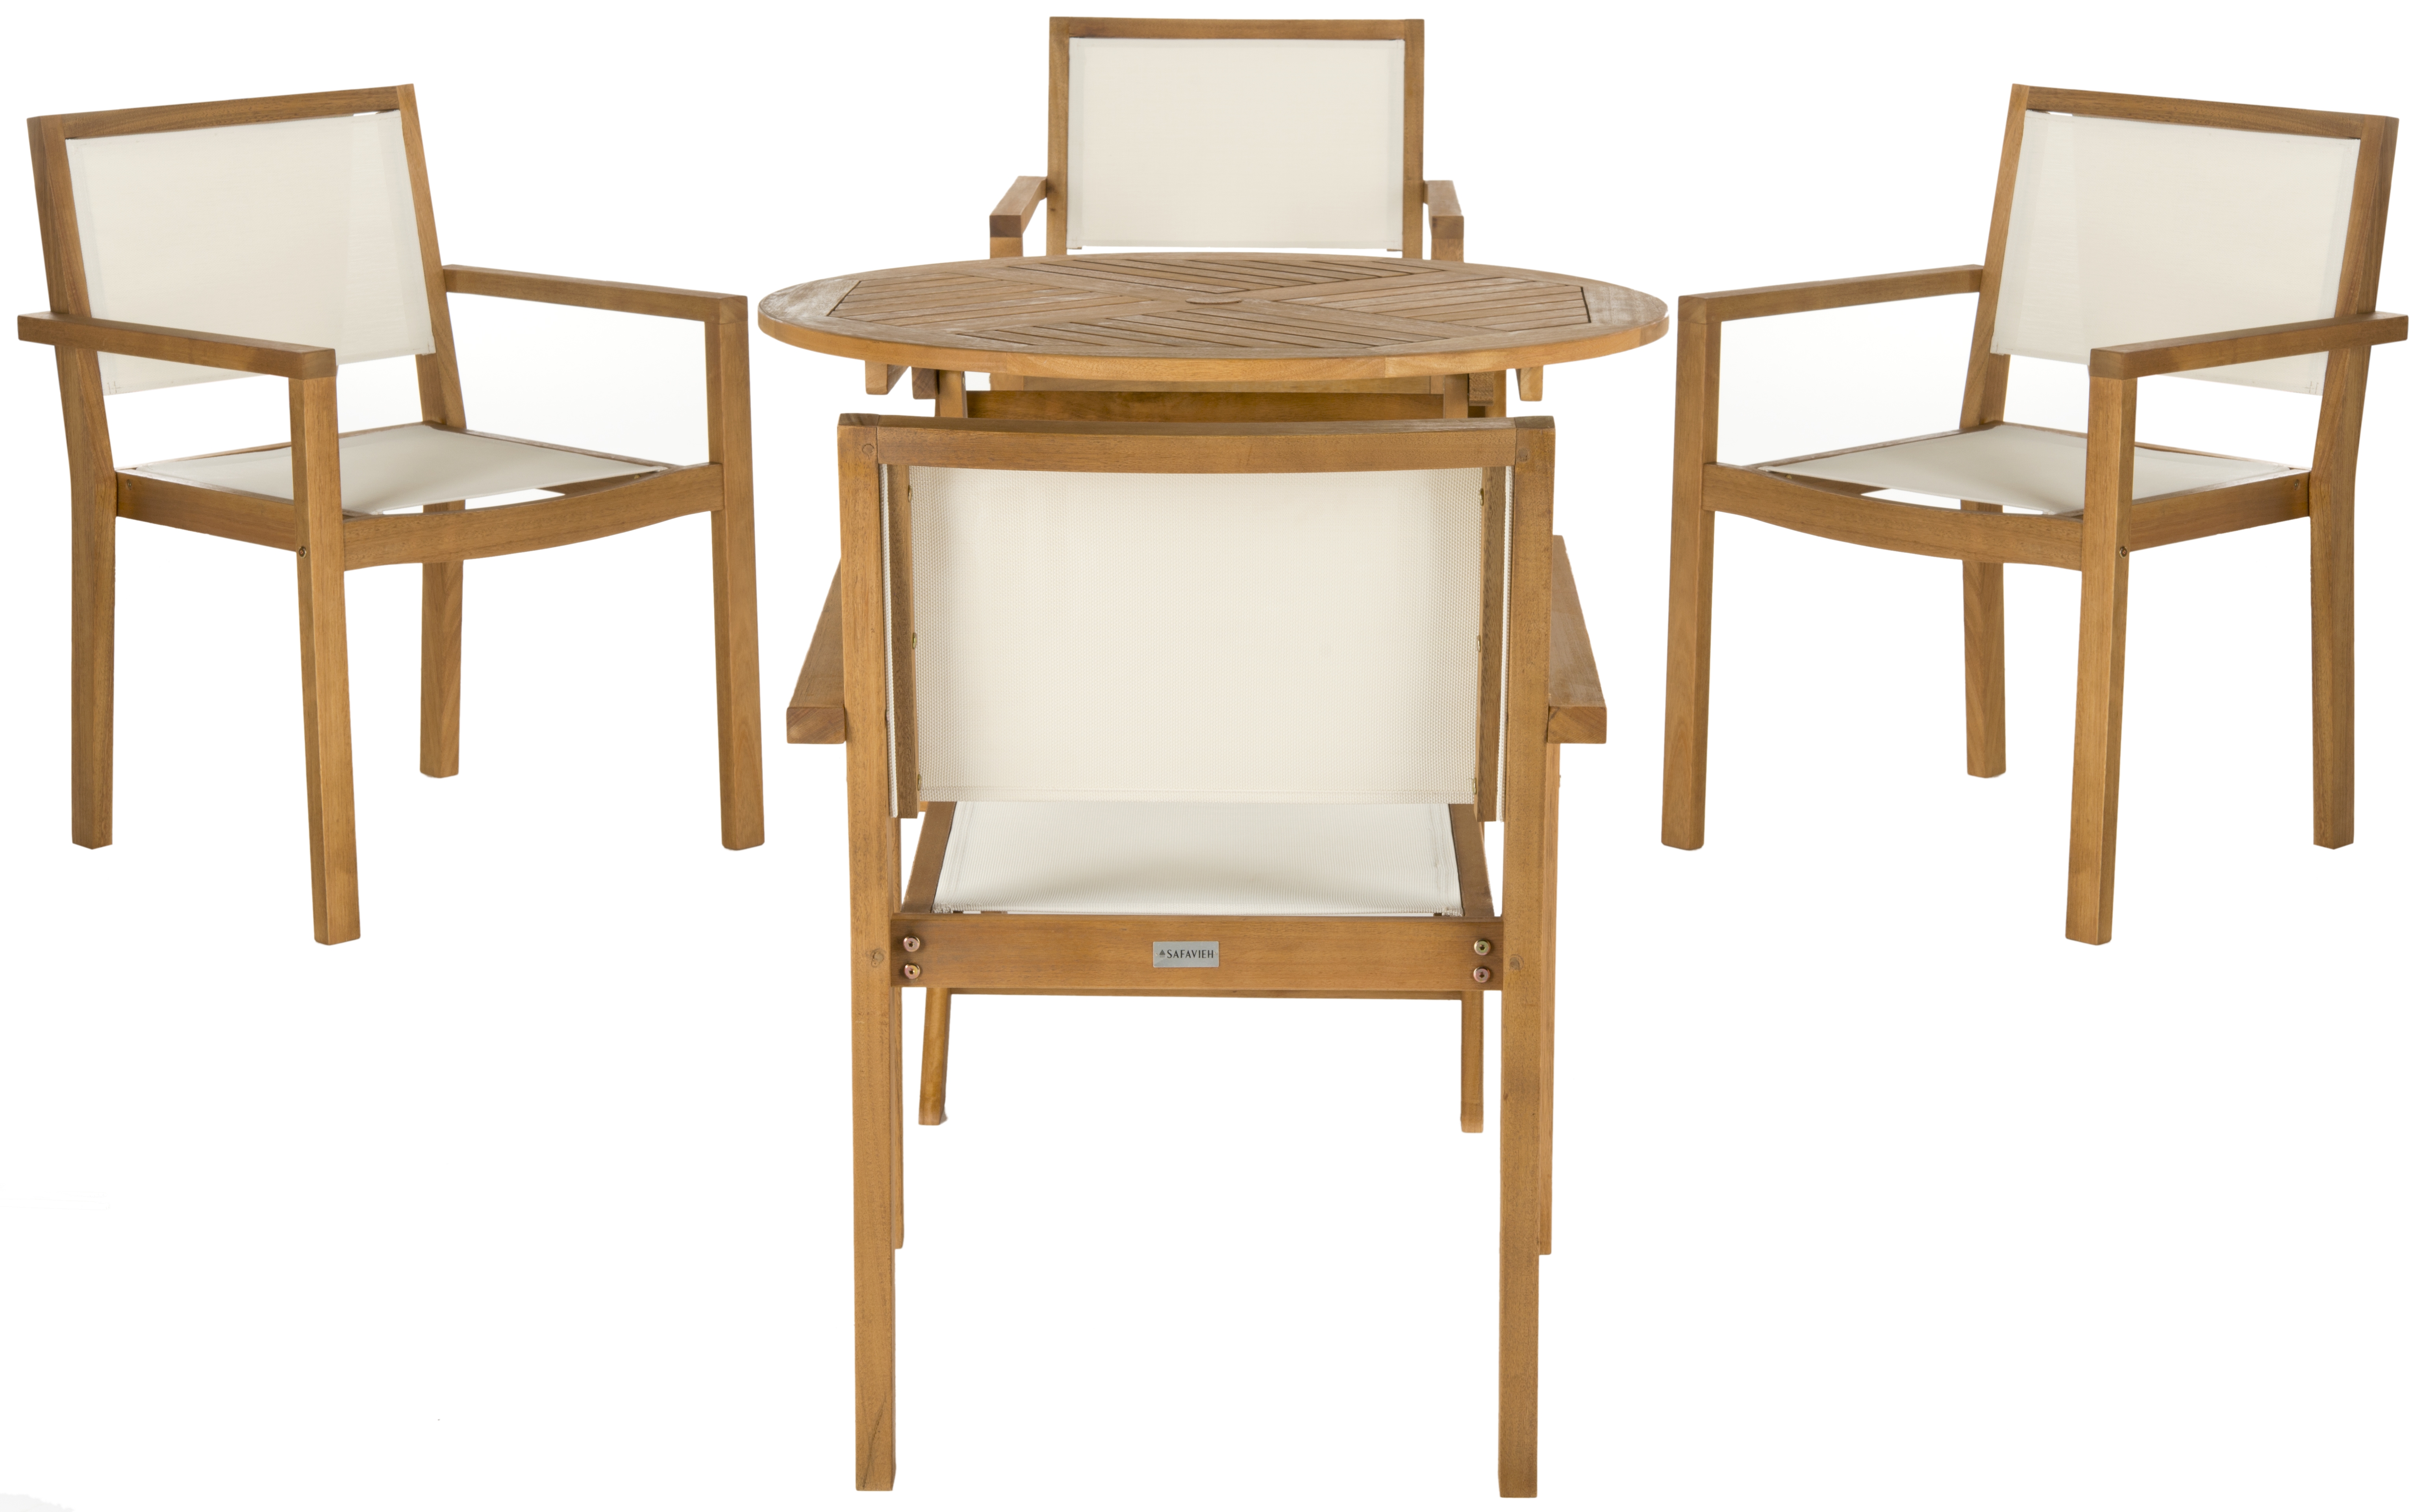 Chante 35.4-Inch Dia Round Table 5 Piece Dining Set - Natural - Arlo Home - Image 0